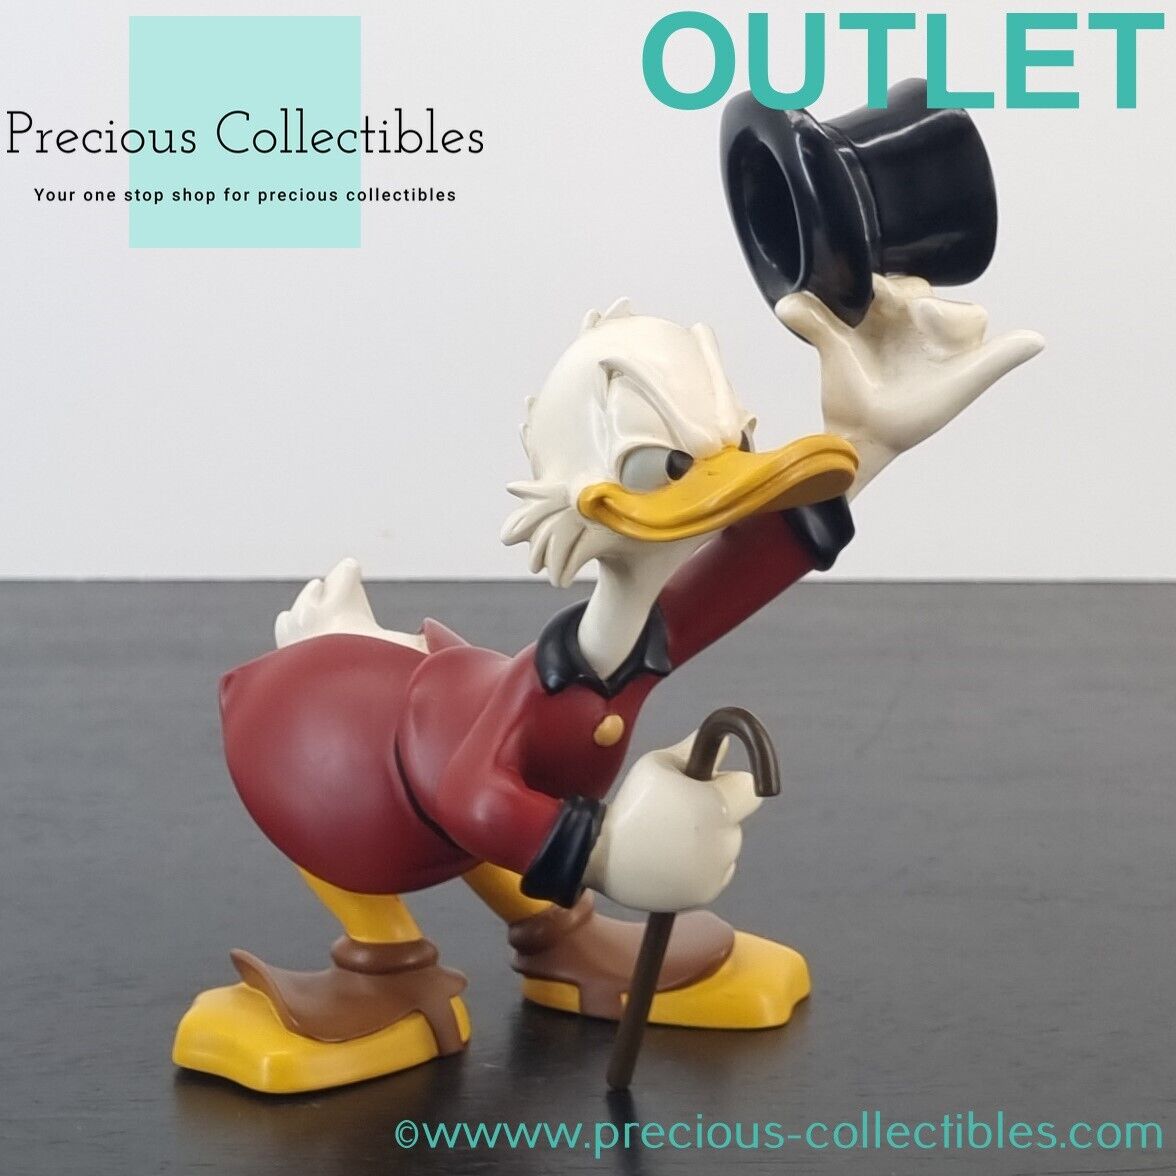 Extremely rare Scrooge McDuck figurine. Demons and Merveilles. Disney.